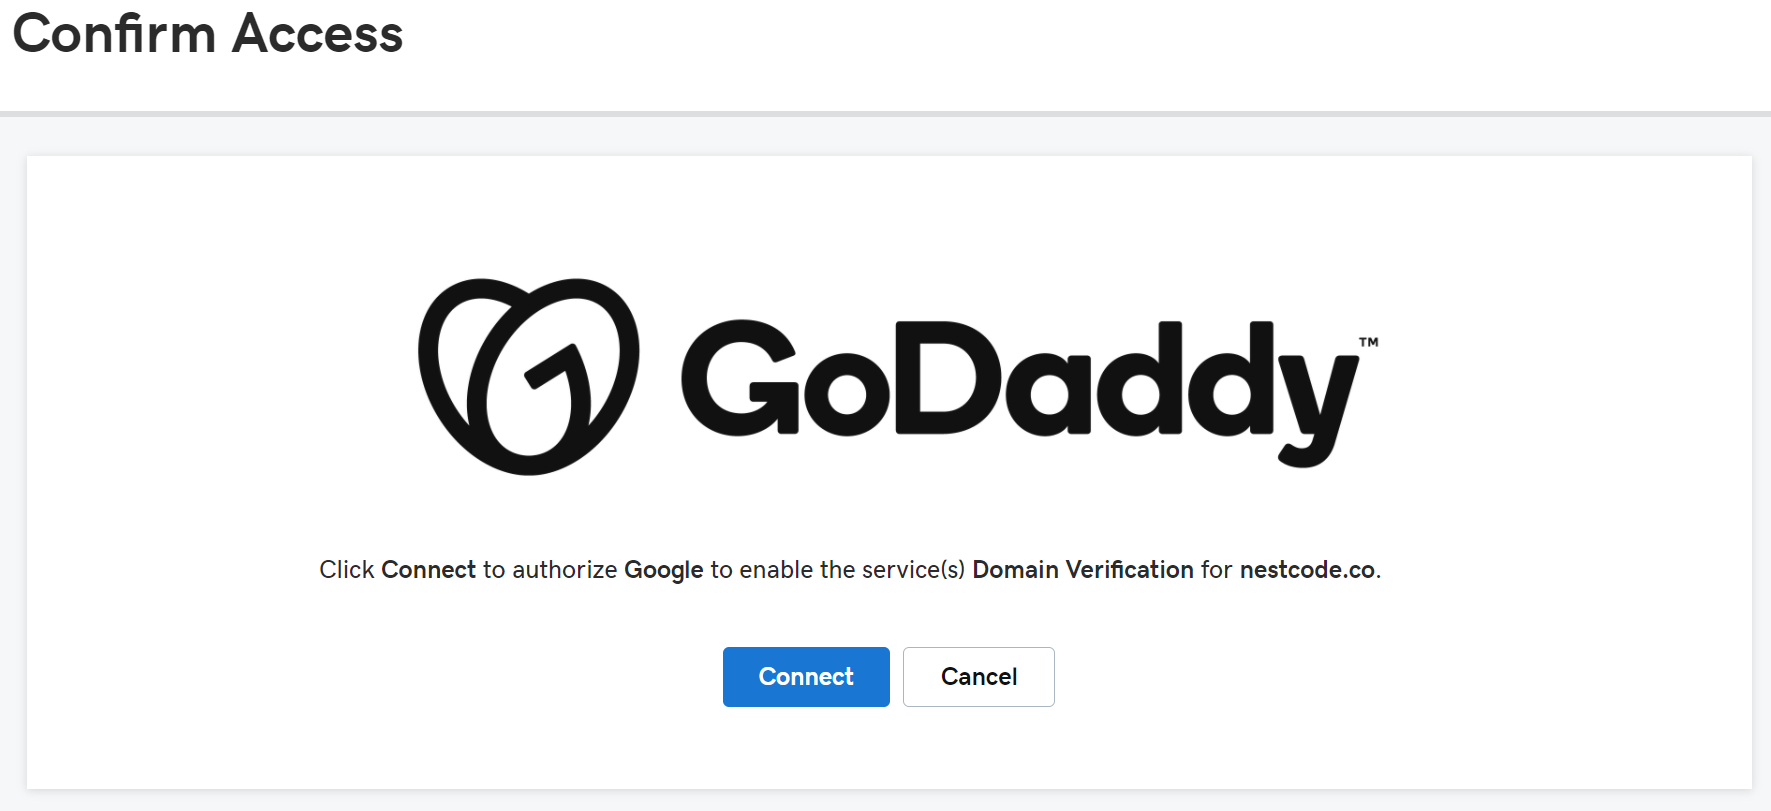 the-practical-seo-rules-to-apply-to-your-website-for-further-optimization-confirm-godaddy